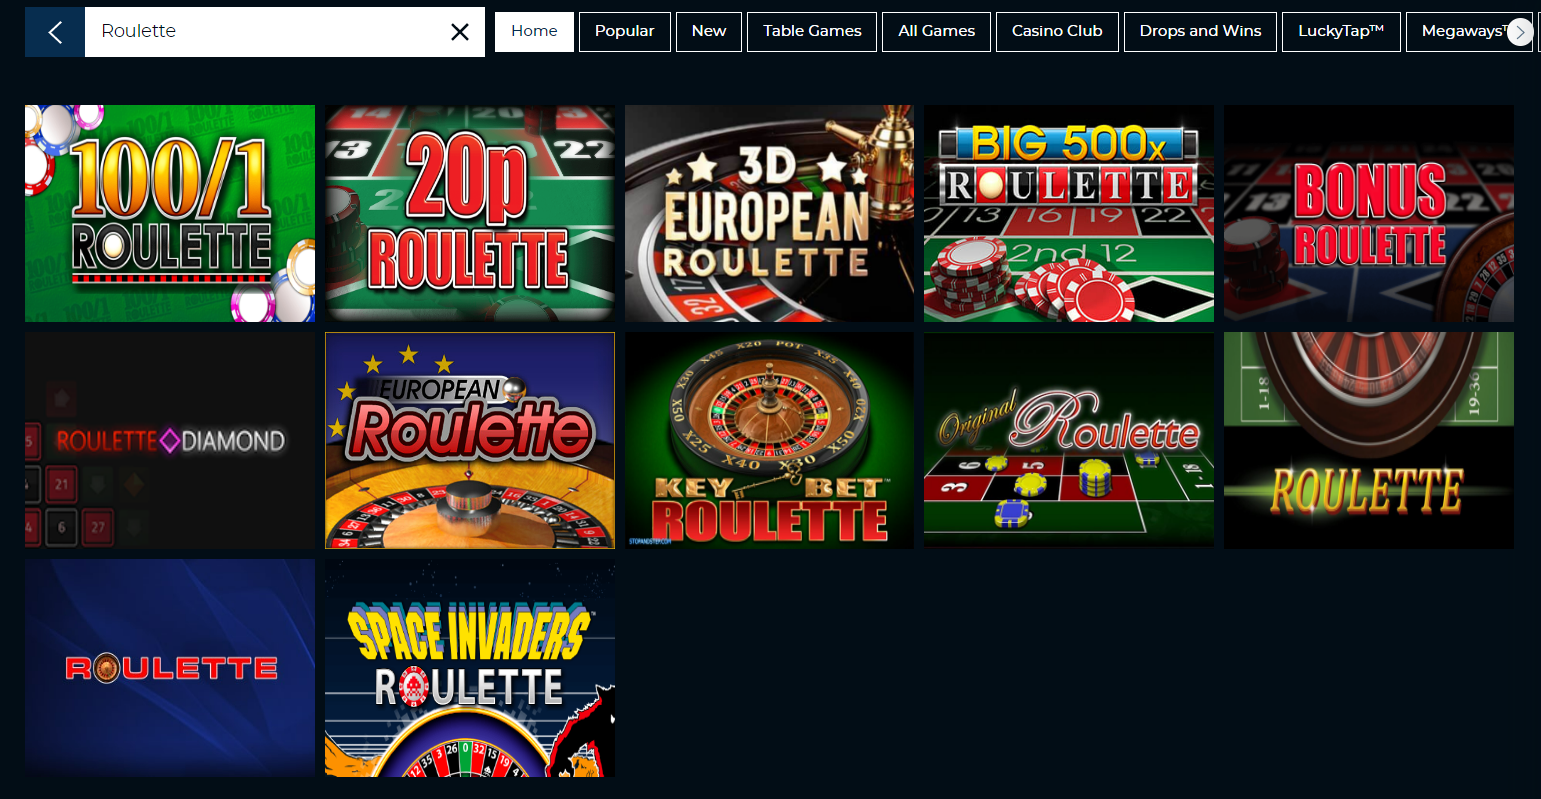 Roulette at Star Sports Casino